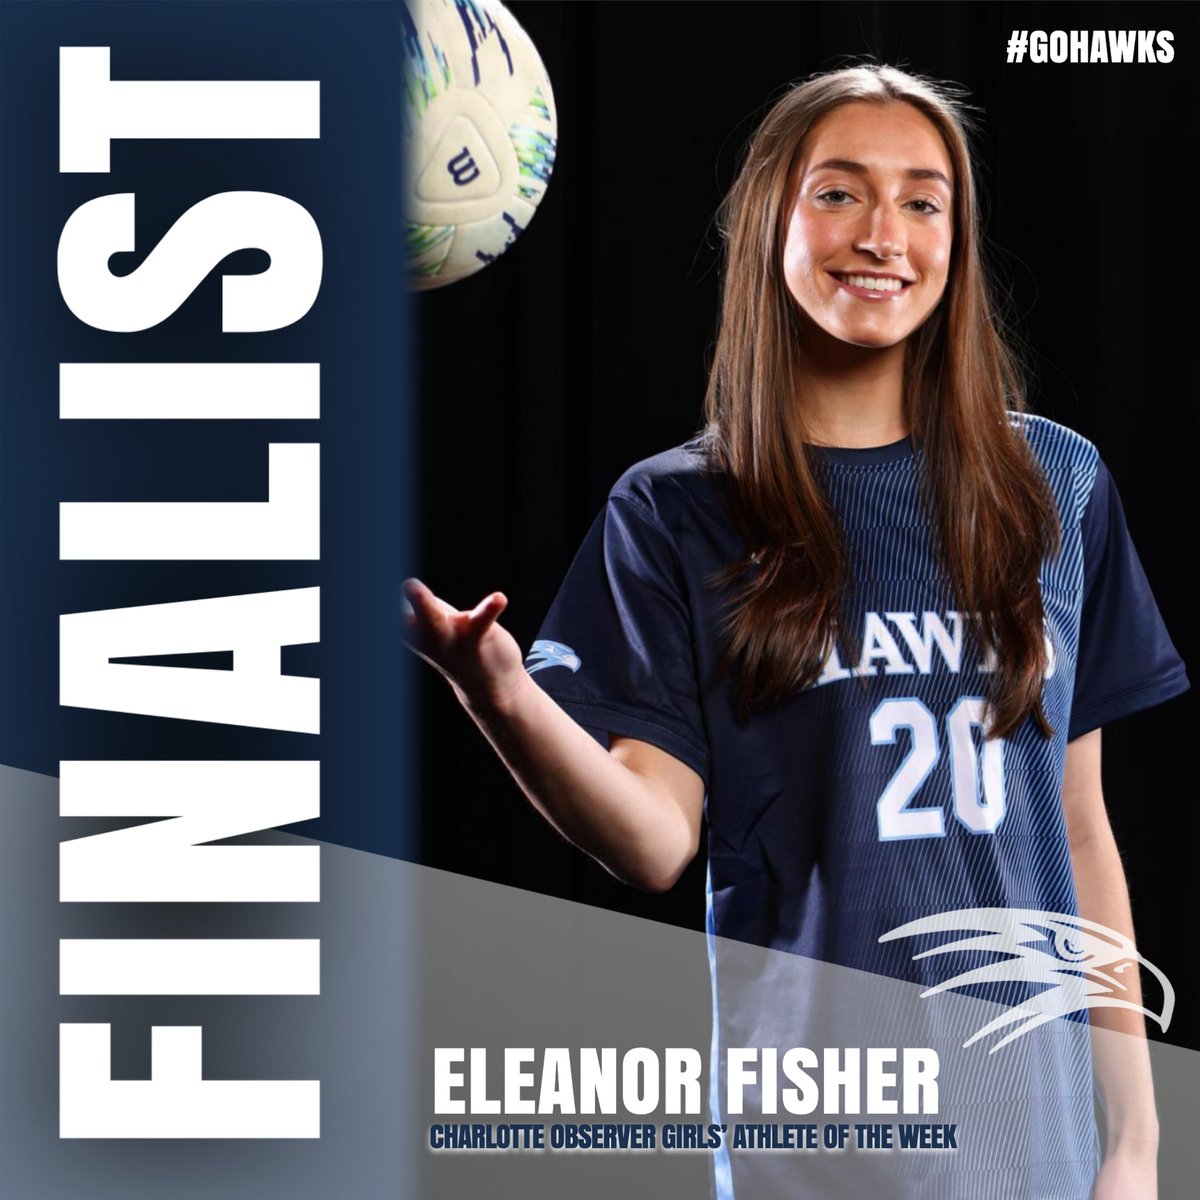 Eleanor Fisher is an @theobserver Athlete of the Week Finalist! She scored 2 goals & 1 assist in a 6-0 win @ Charlotte Christian April 10, then added an assist in a 3-0 win over Charlotte Catholic April 12. Vote here: tinyurl.com/3pbzadyr @CLSHawks_Soccer #GoHawks